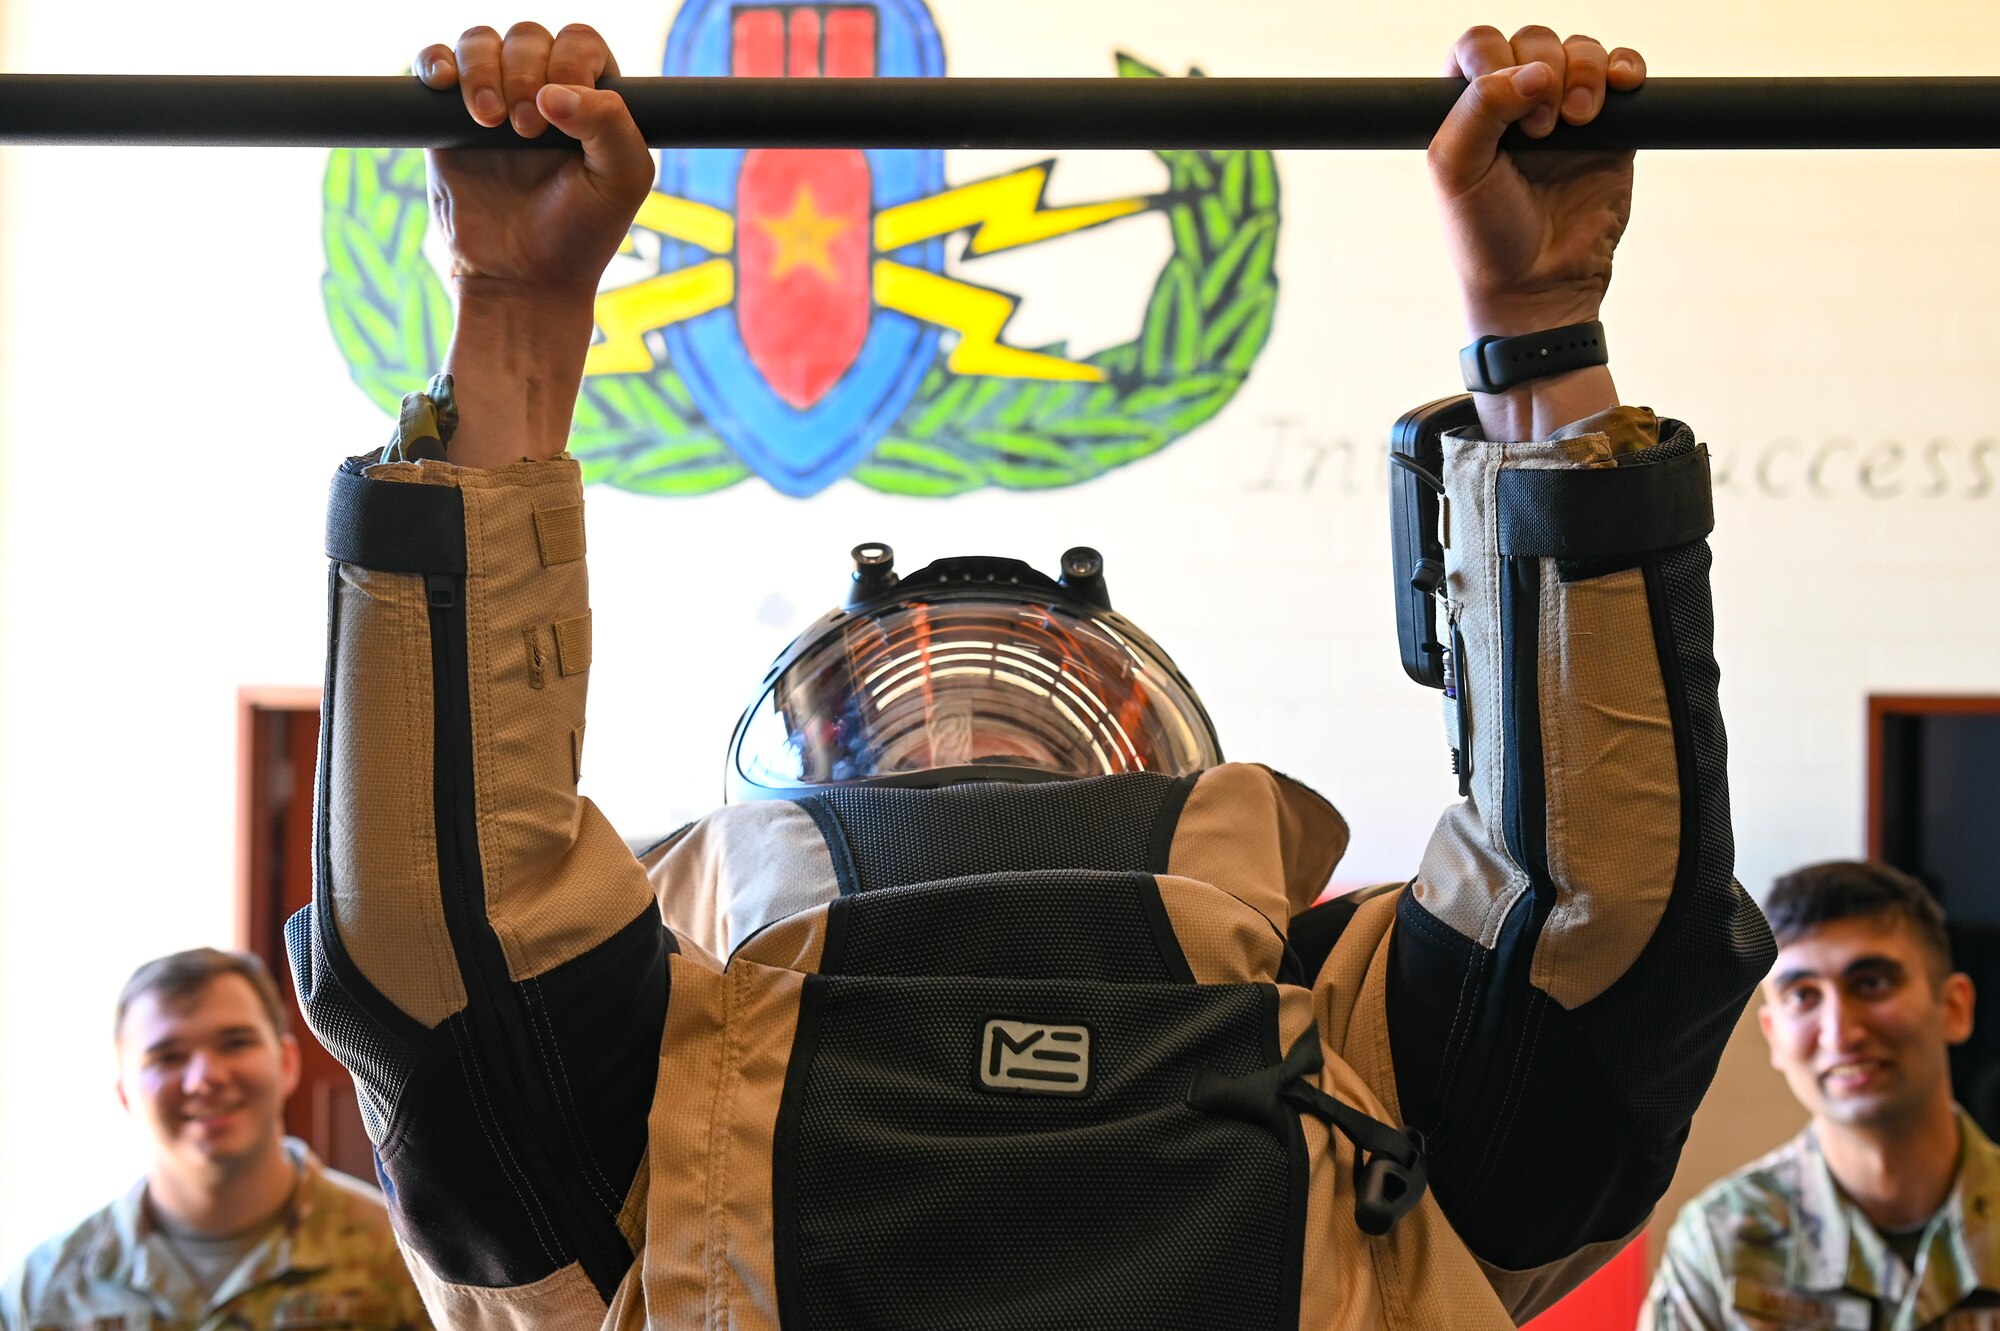 Tristan Lewis, University of Arizona Air Force ROTC cadet, does a pull-up in a bomb suit during Project Tuskegee 2.0 at Dyess Air Force Base, Texas, Aug. 1, 2023. The project is intended to increase the cadets' understanding of Air Force and Space Force missions and day-to-day operations. The 19 cadets in attendance represent 19 different Air Force ROTC detachments across the enterprise's four regions. (U.S. Air Force photo by Airman 1st Class Emma Anderson)